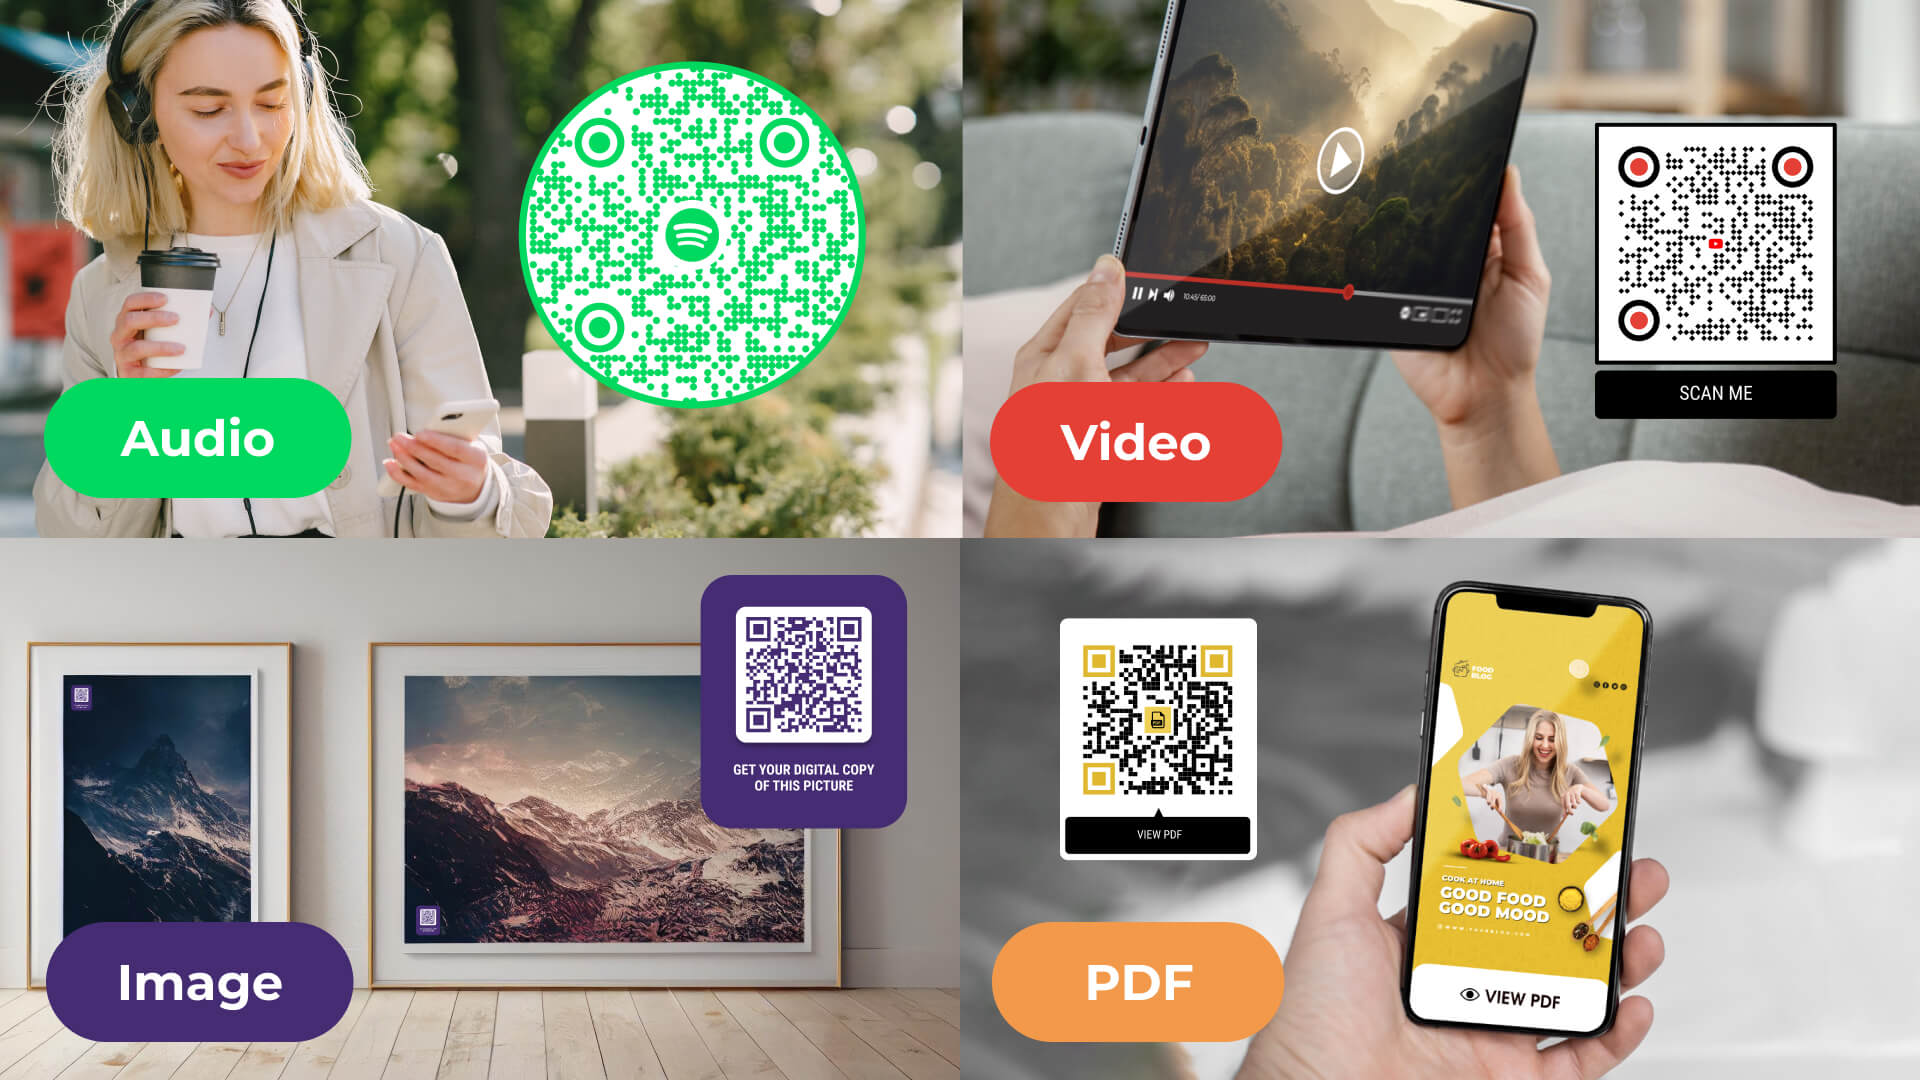 Use mutimedia QR Code generator to generate qr codes for audio and visual content